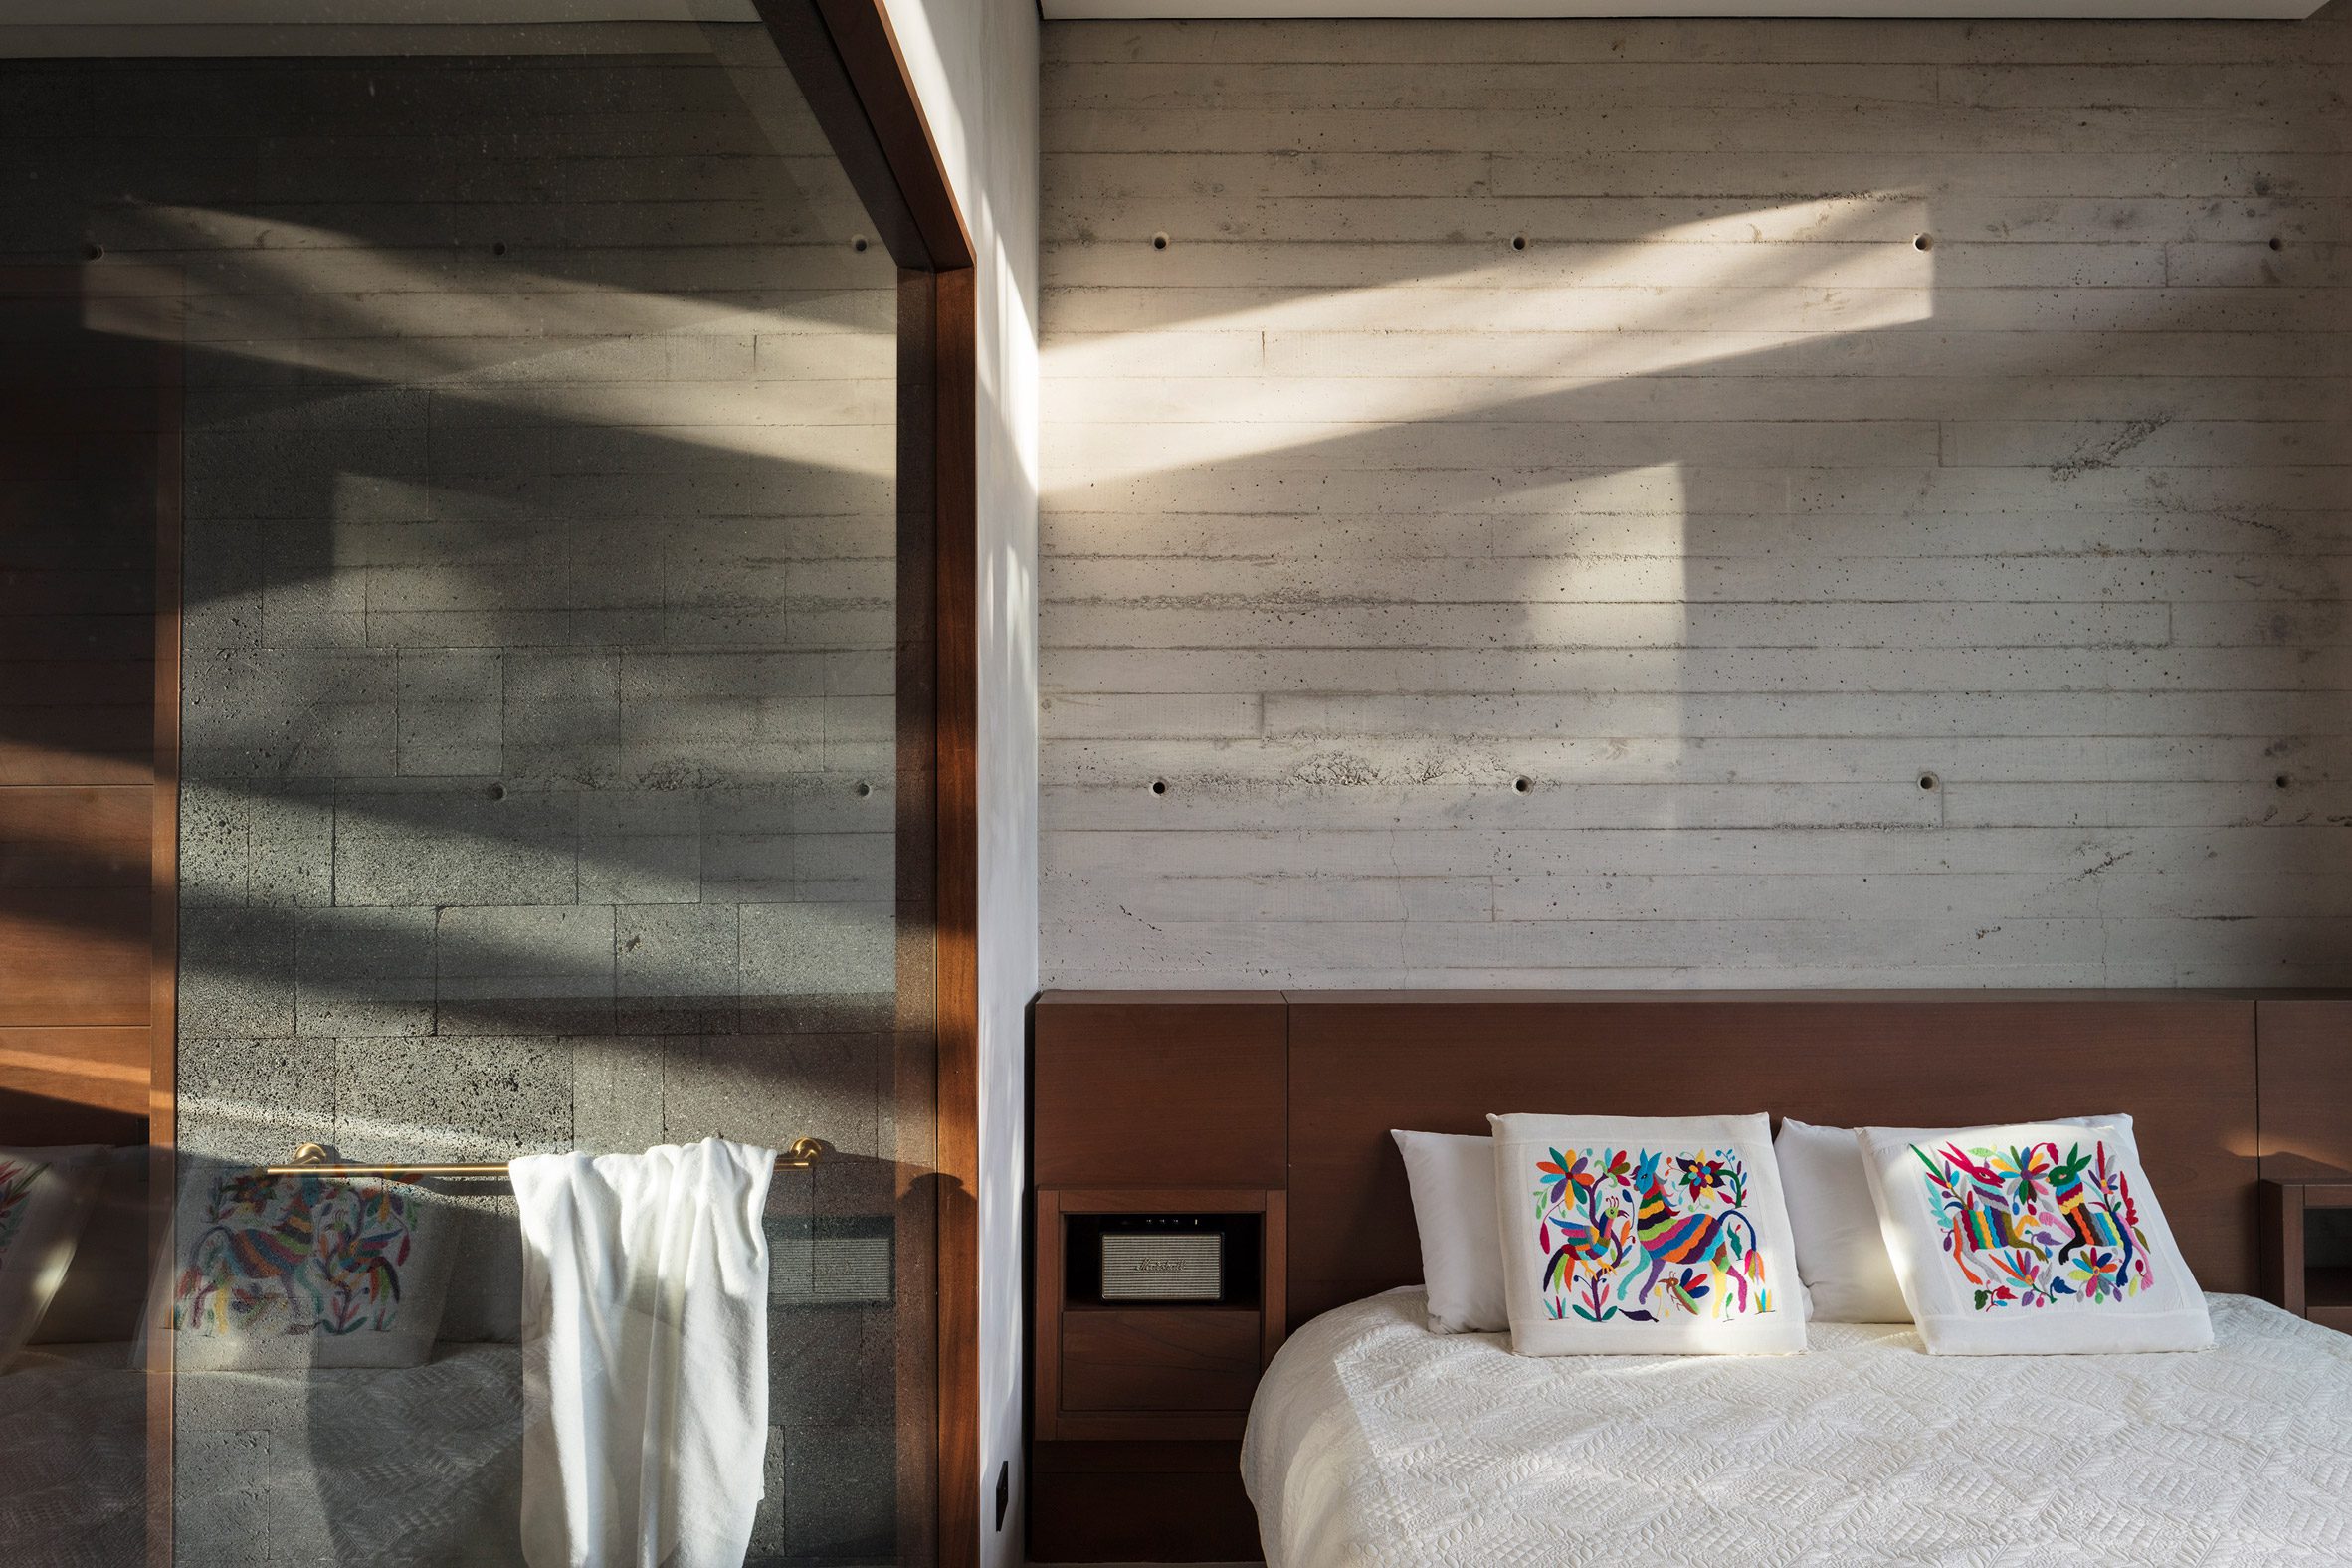 A guest bedroom with concrete walls